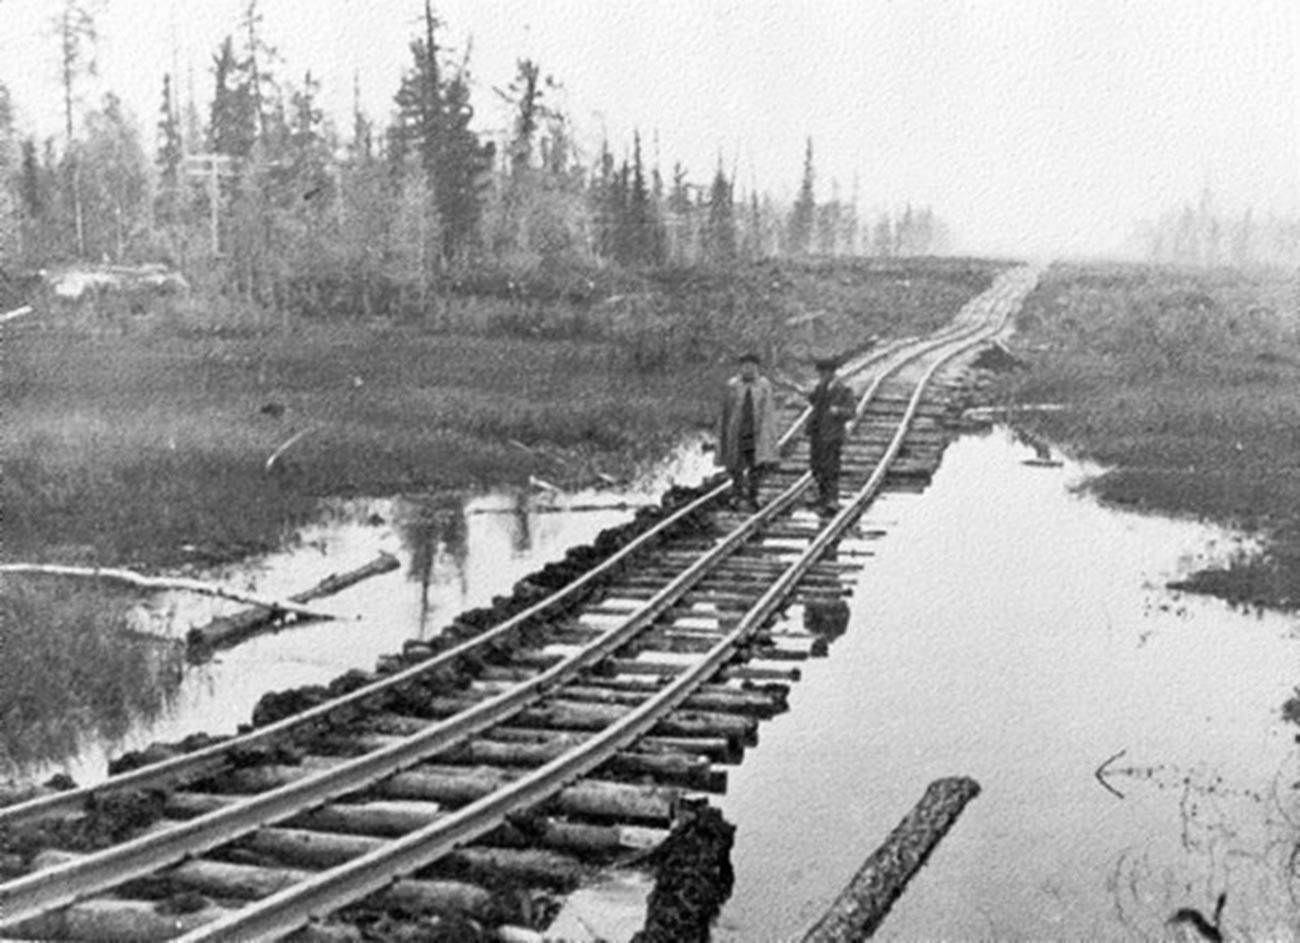 Builing of the railway.